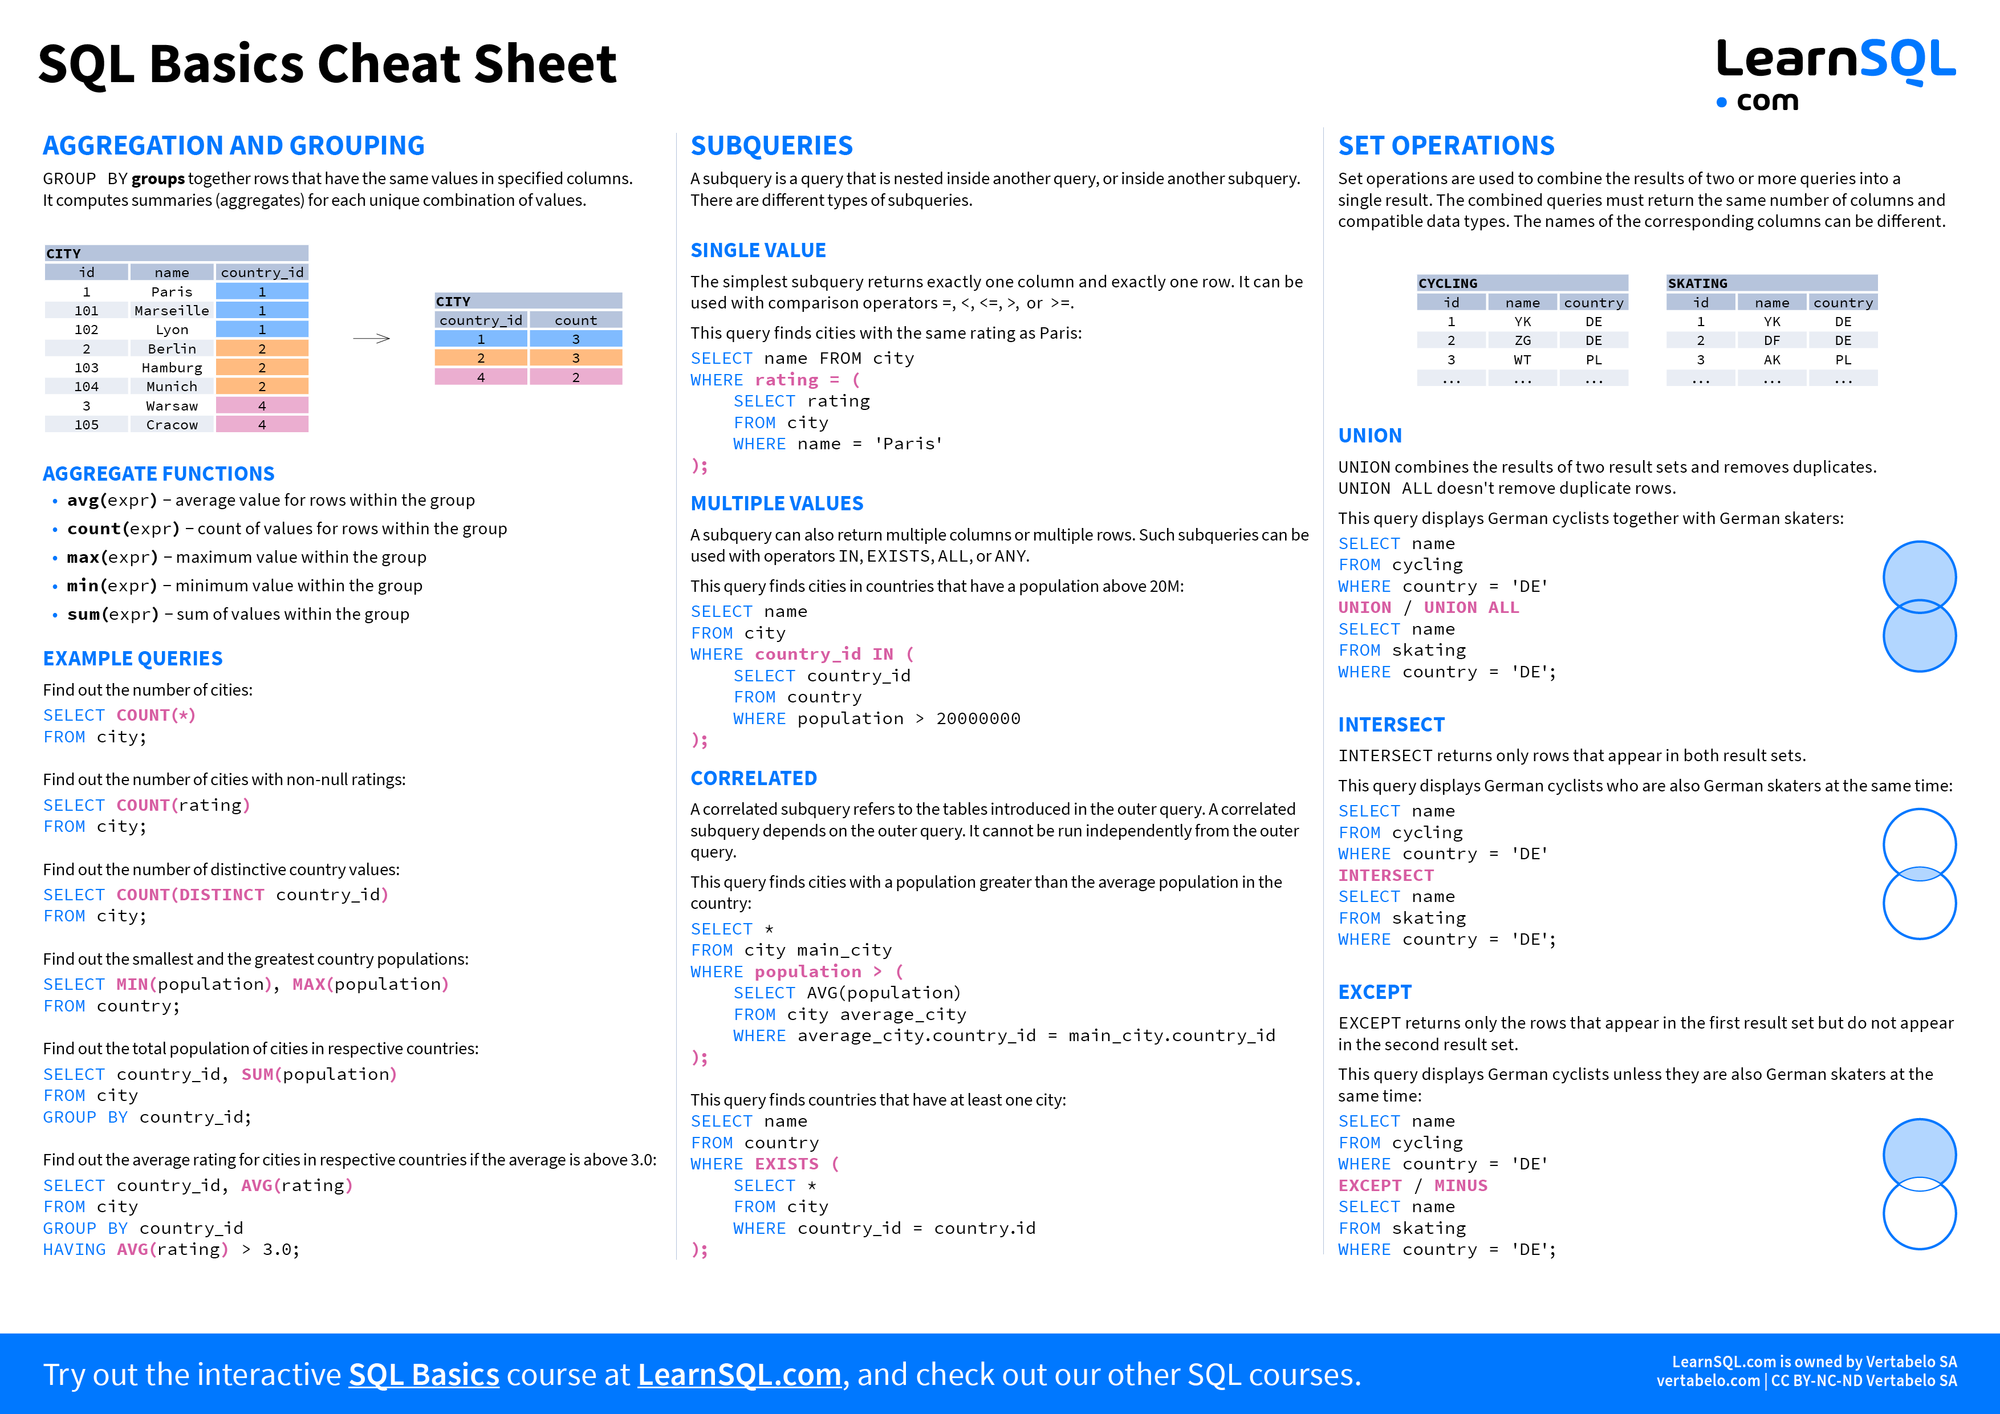 Second page of SQL Basics Cheat Sheet.